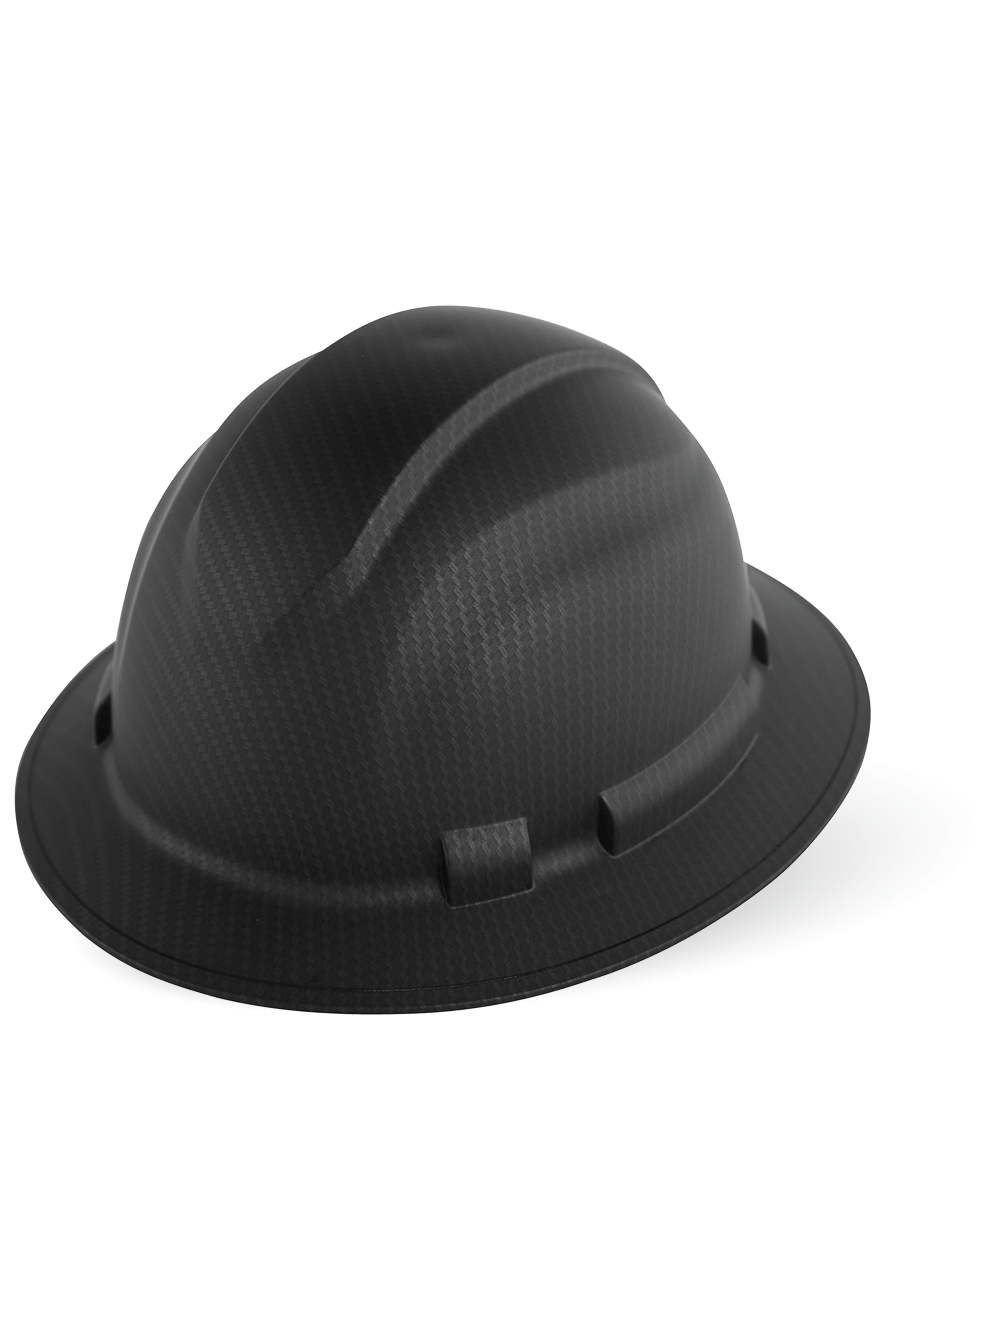 Bullhead Safety™ Head Protection Matte Black Graphite Unvented Full Brim Style Hard Hat With Six-Point Ratchet Suspension - HH-F1-C